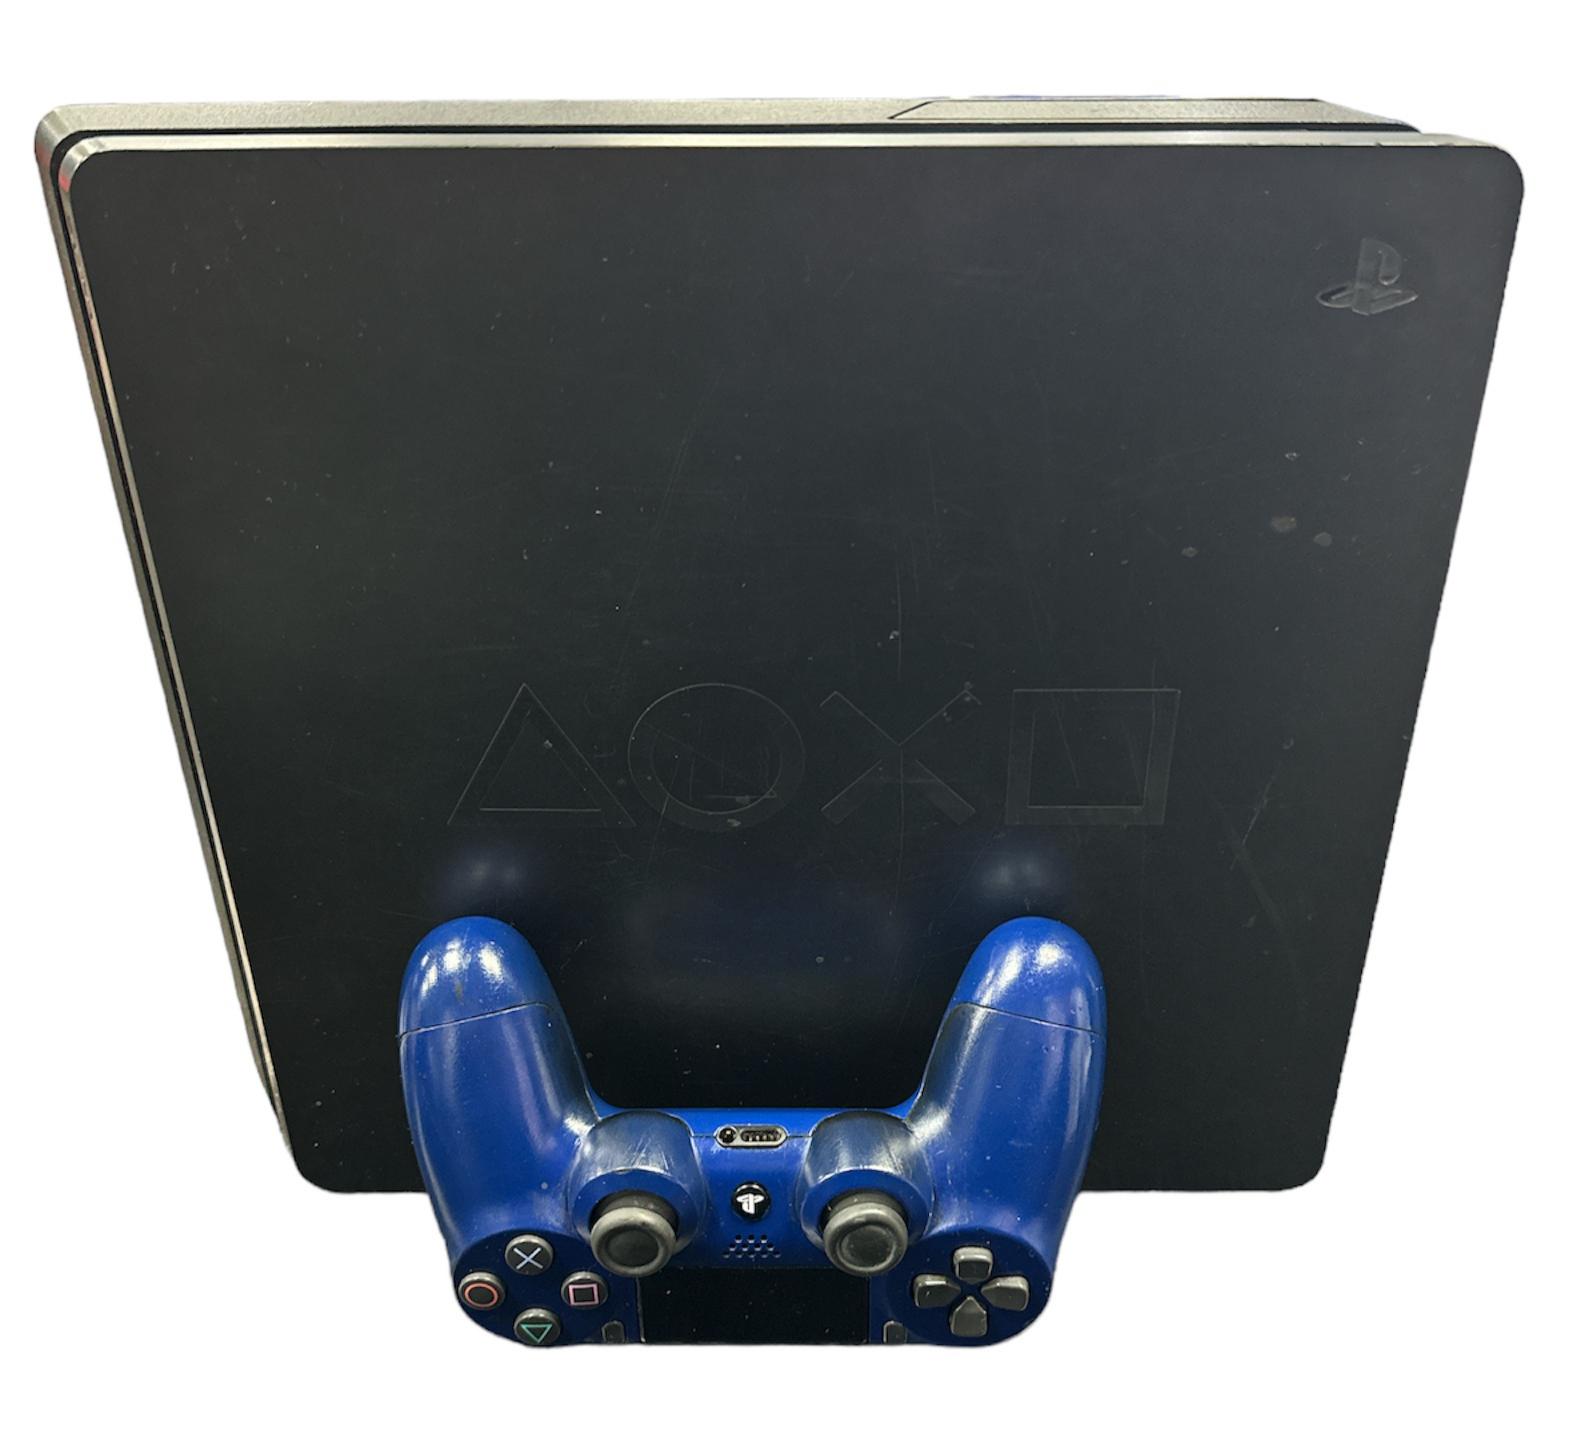 Sony Playstation 4 Slim 500GB Unboxed Console.